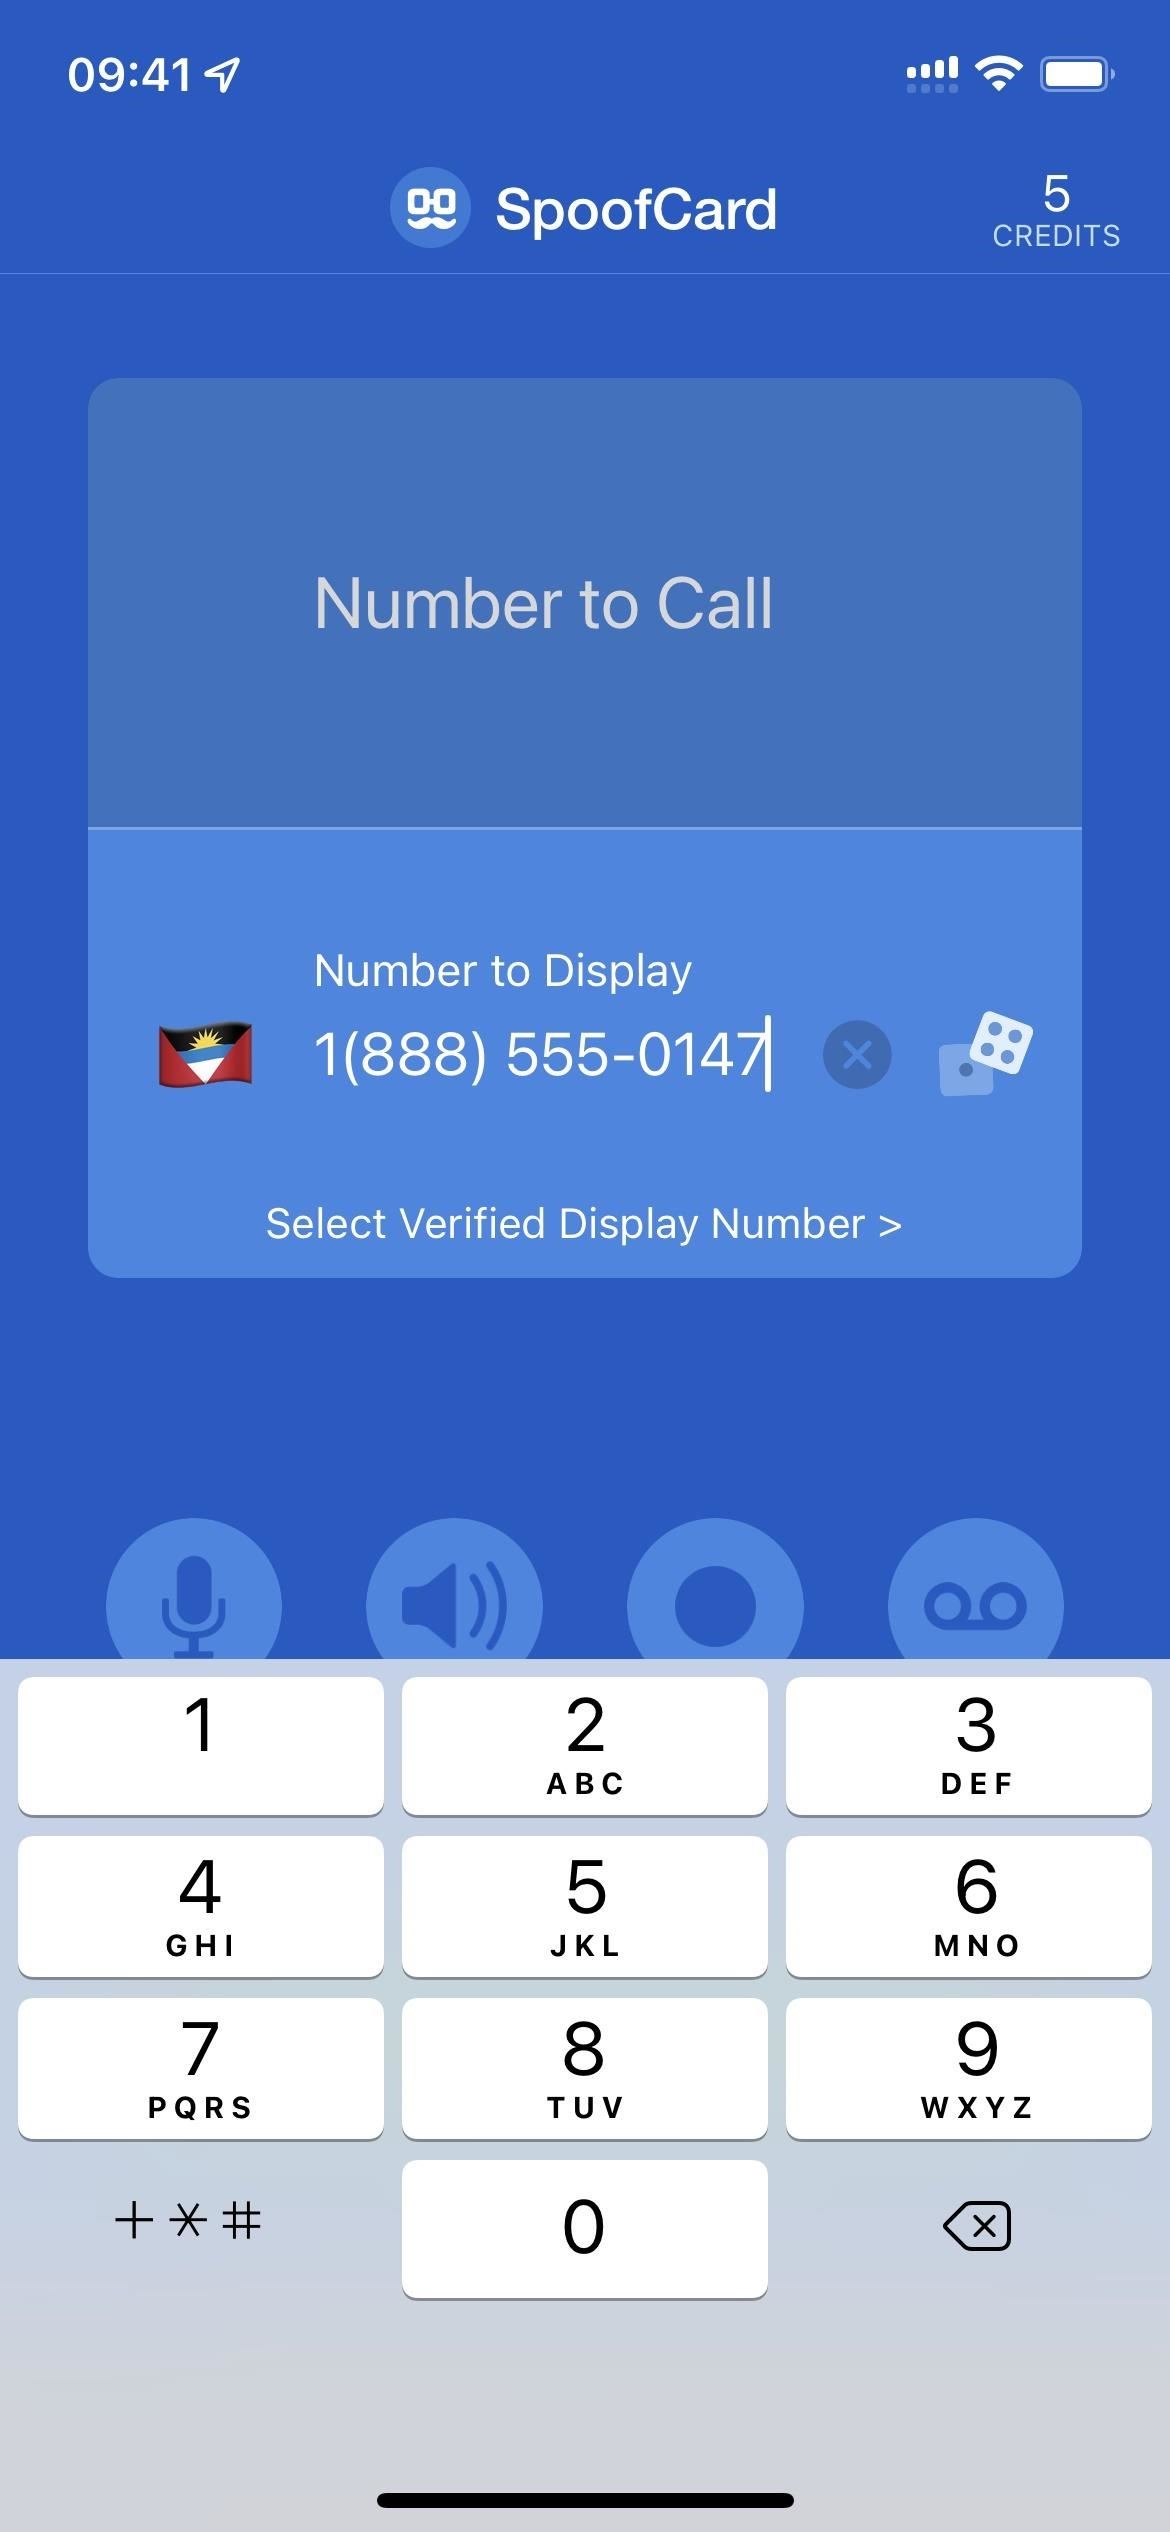 Make Spoofed Calls Using Any Phone Number You Want Right from Your Smartphone